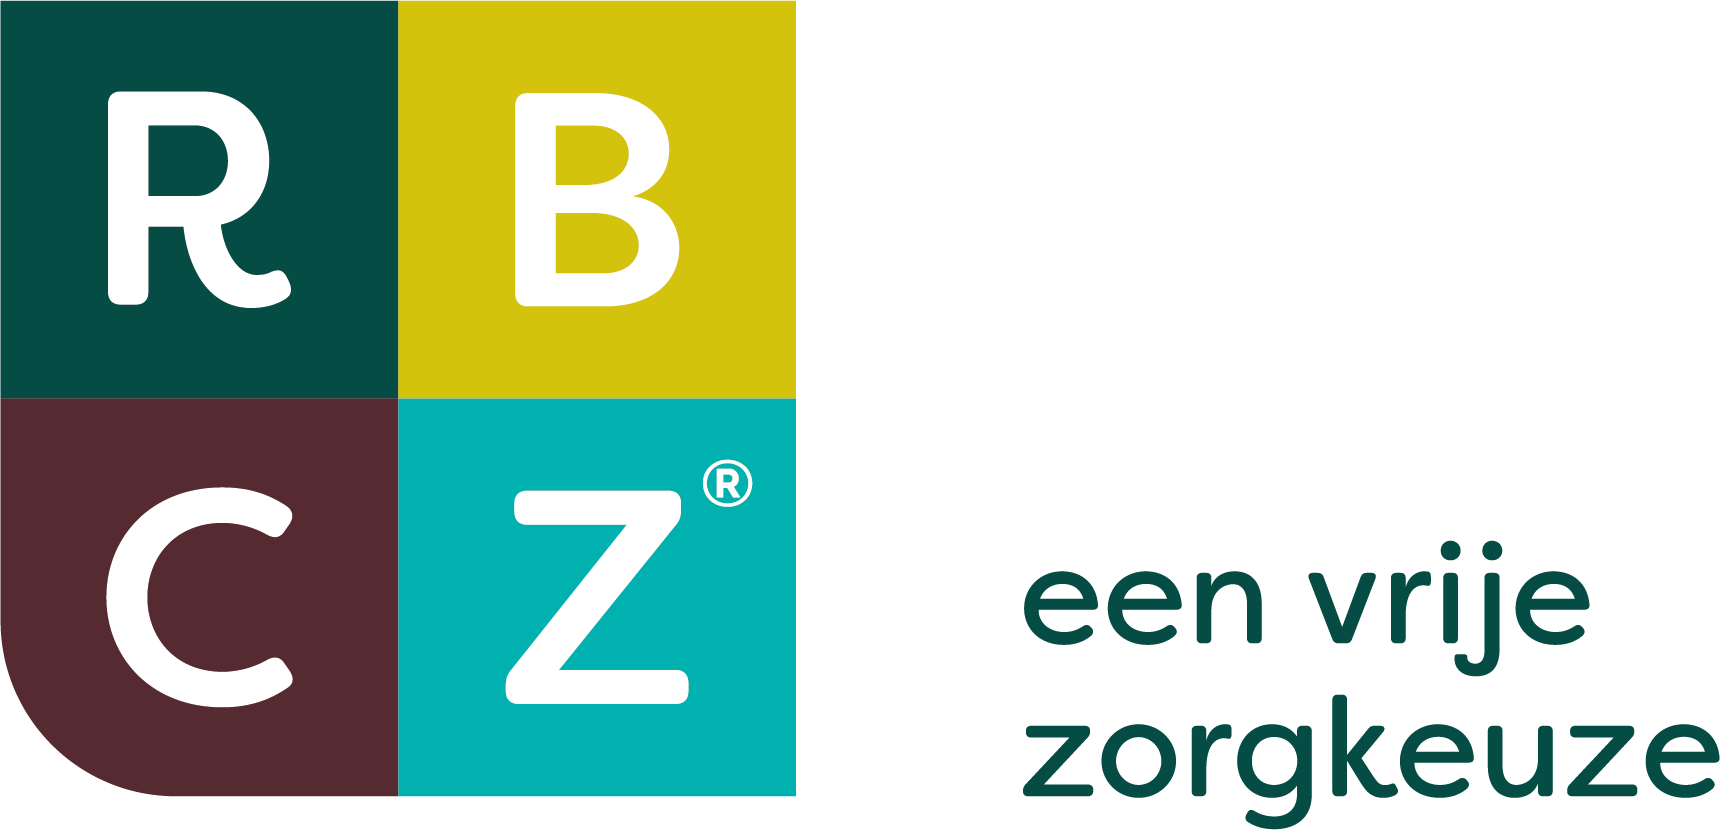 RBCZ erkende therapeut